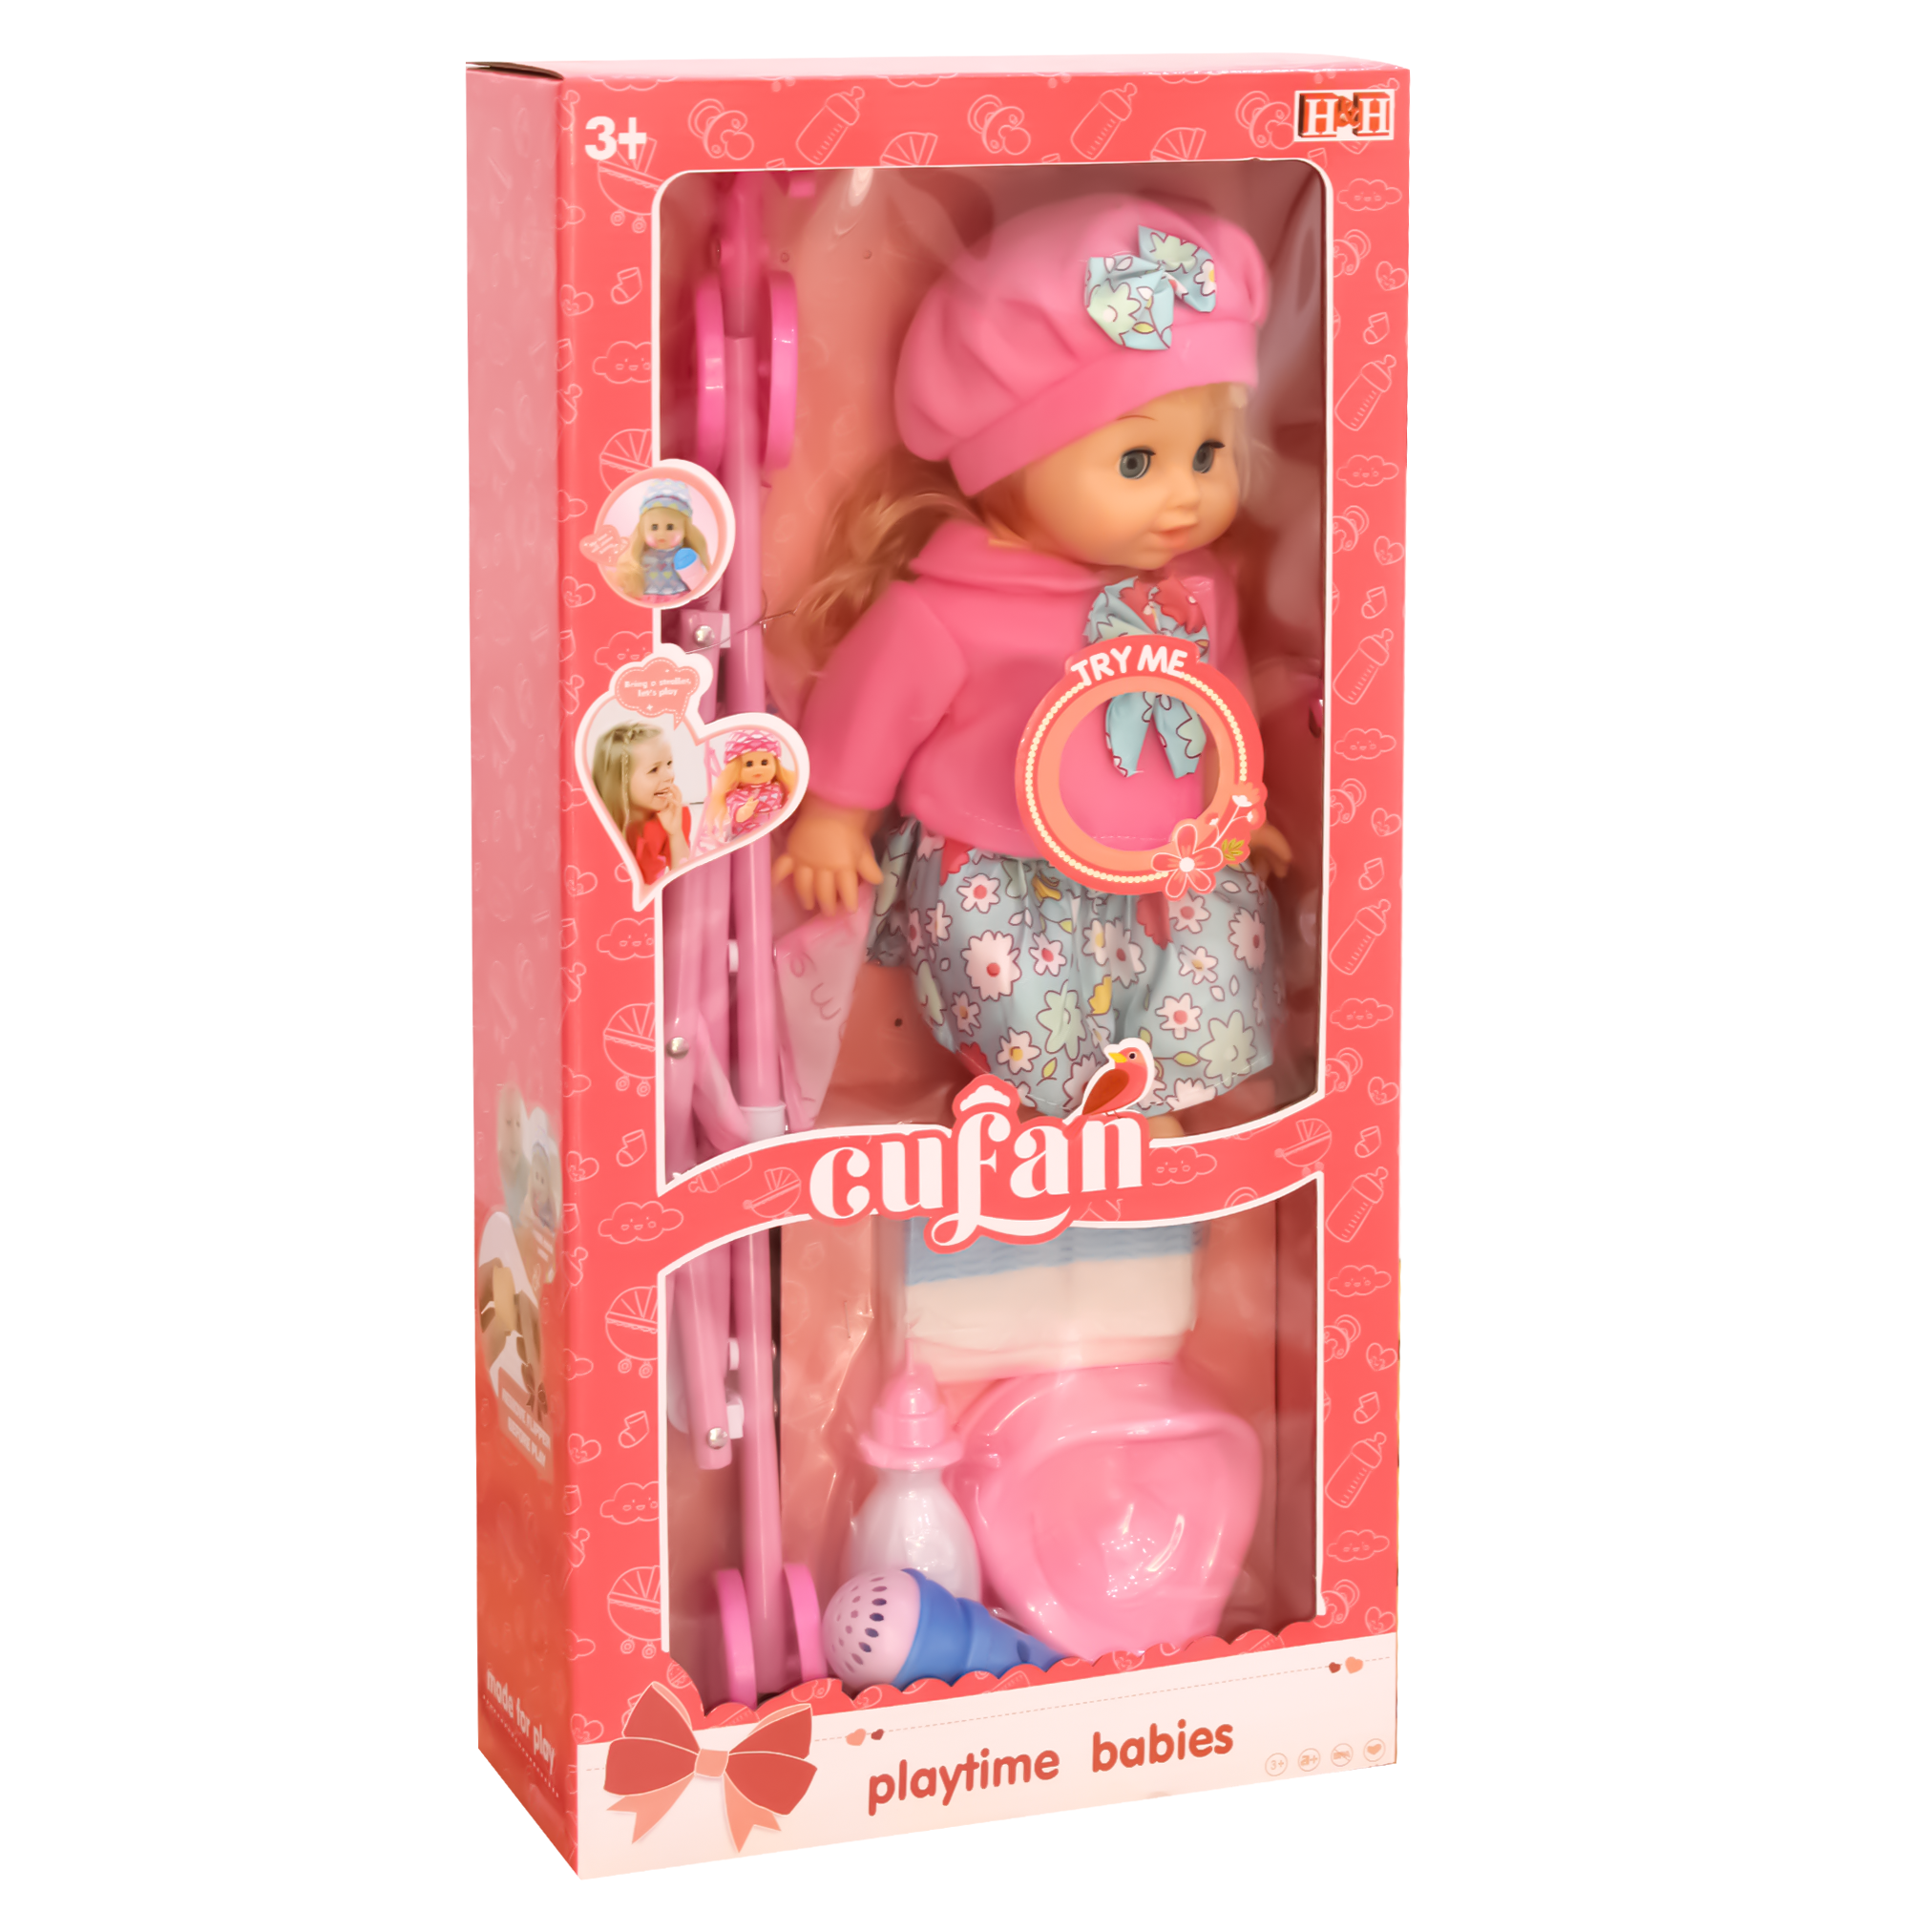 Cufan sweet baby doll with accessories Playtime Babies